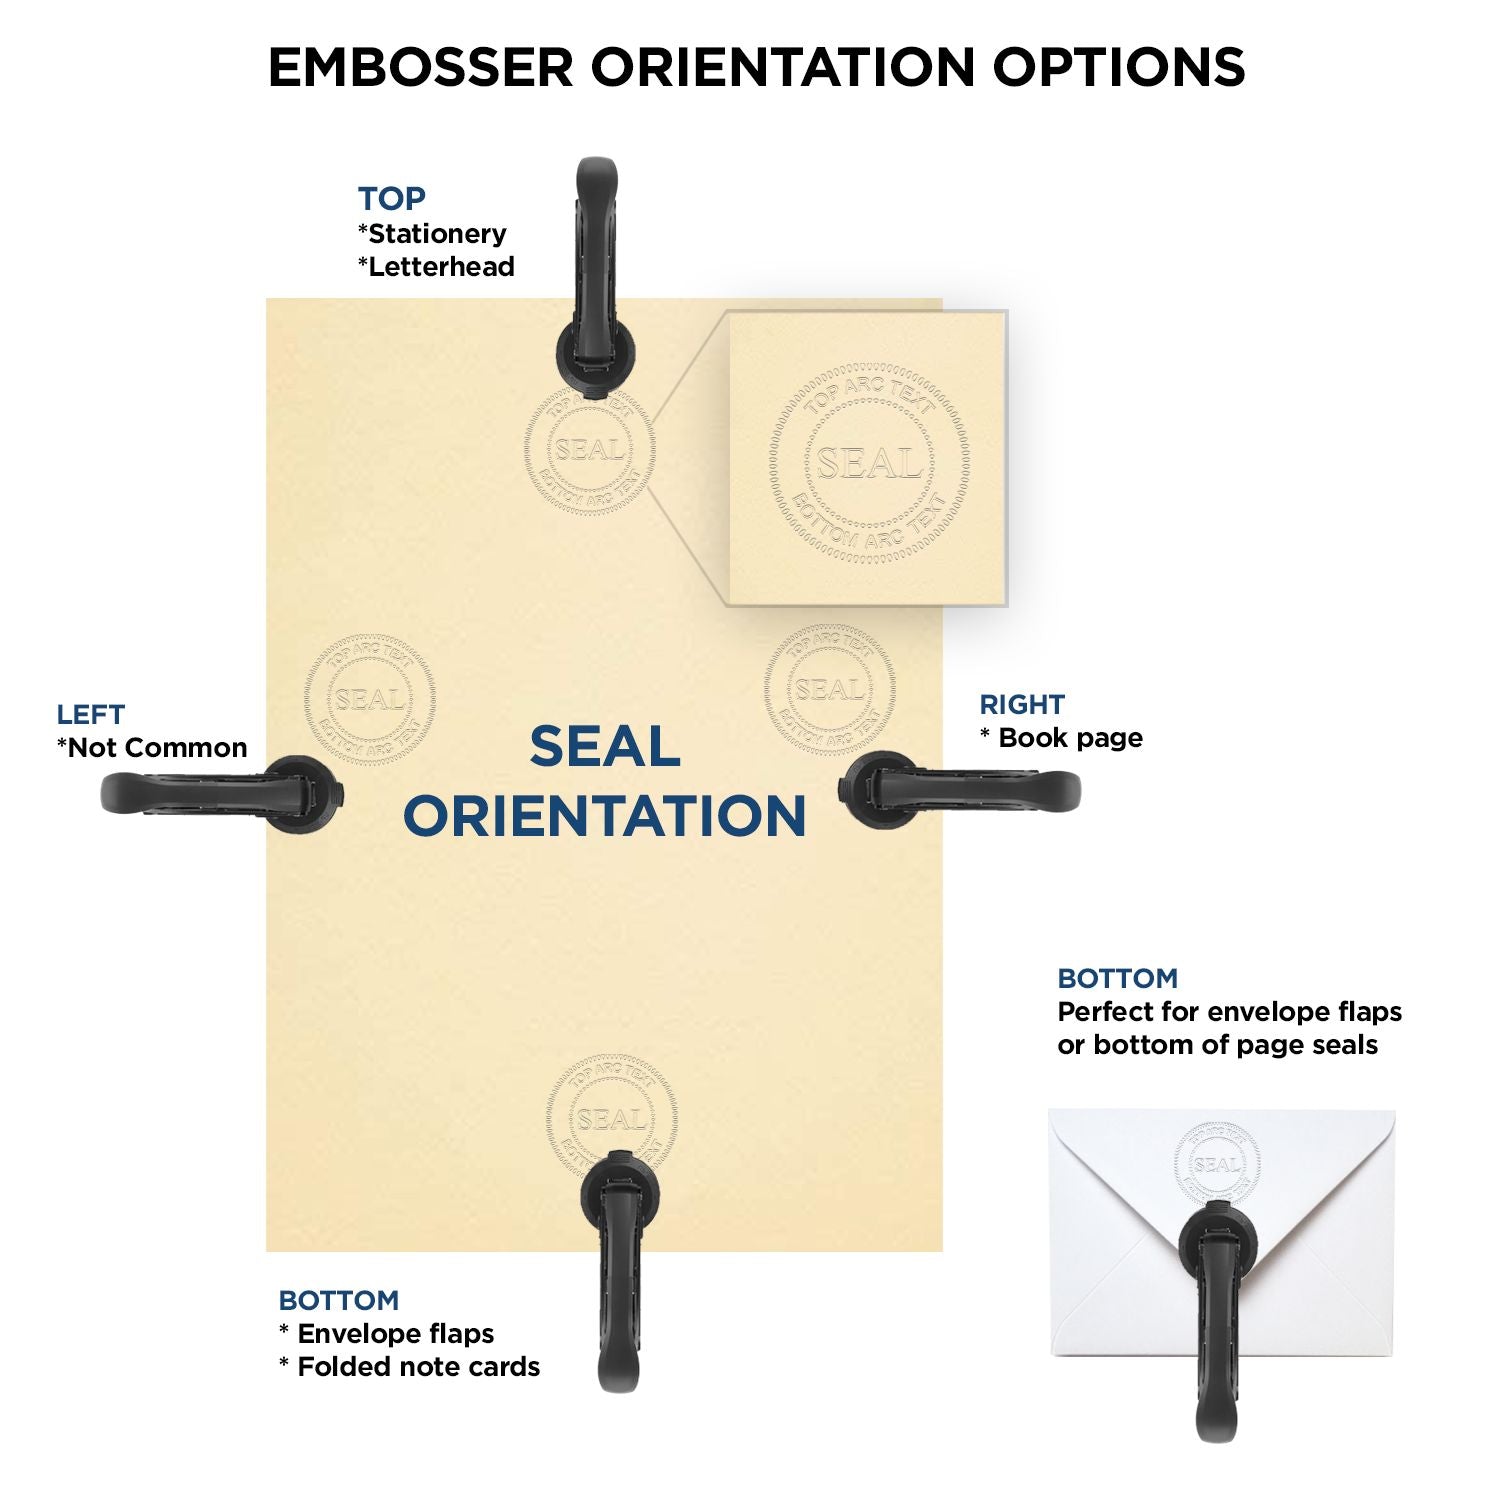 An infographic for the Long Reach Tennessee Land Surveyor Seal showing embosser orientation, this is showing examples of a top, bottom, right and left insert.